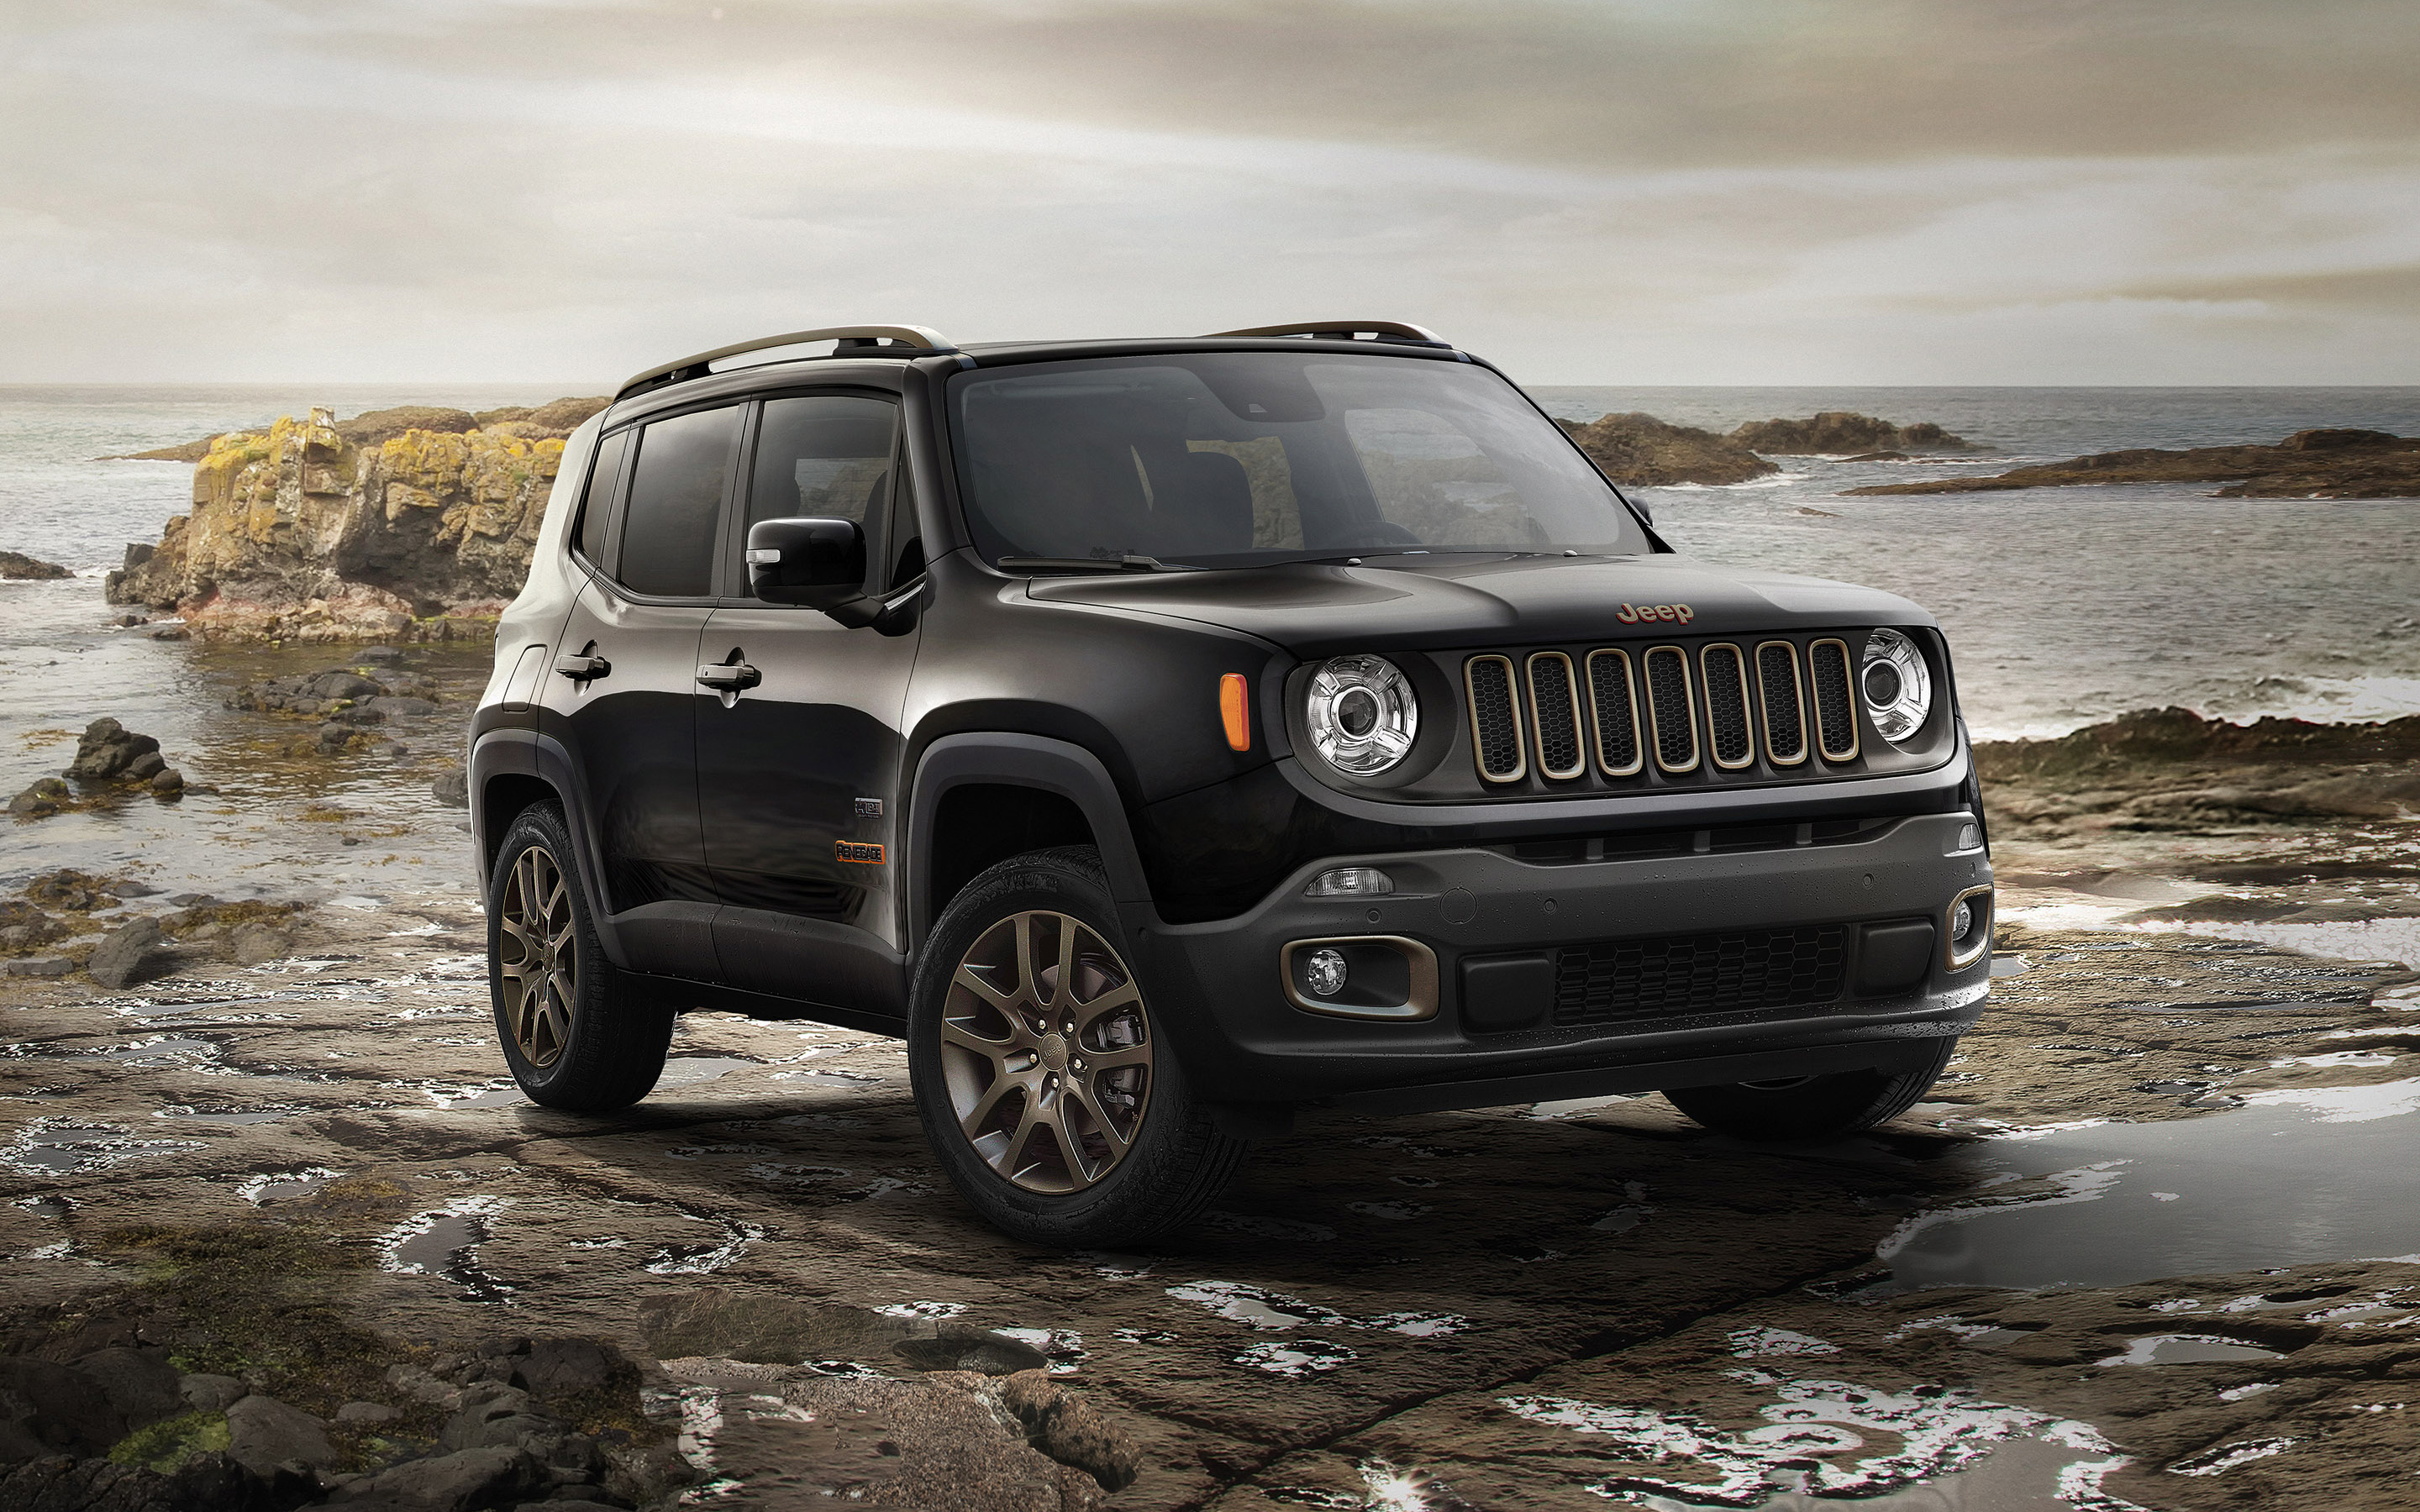 New Model Jeep Renegade Background Wallpaper - Black 75th Anniversary Jeep Renegade Black - HD Wallpaper 